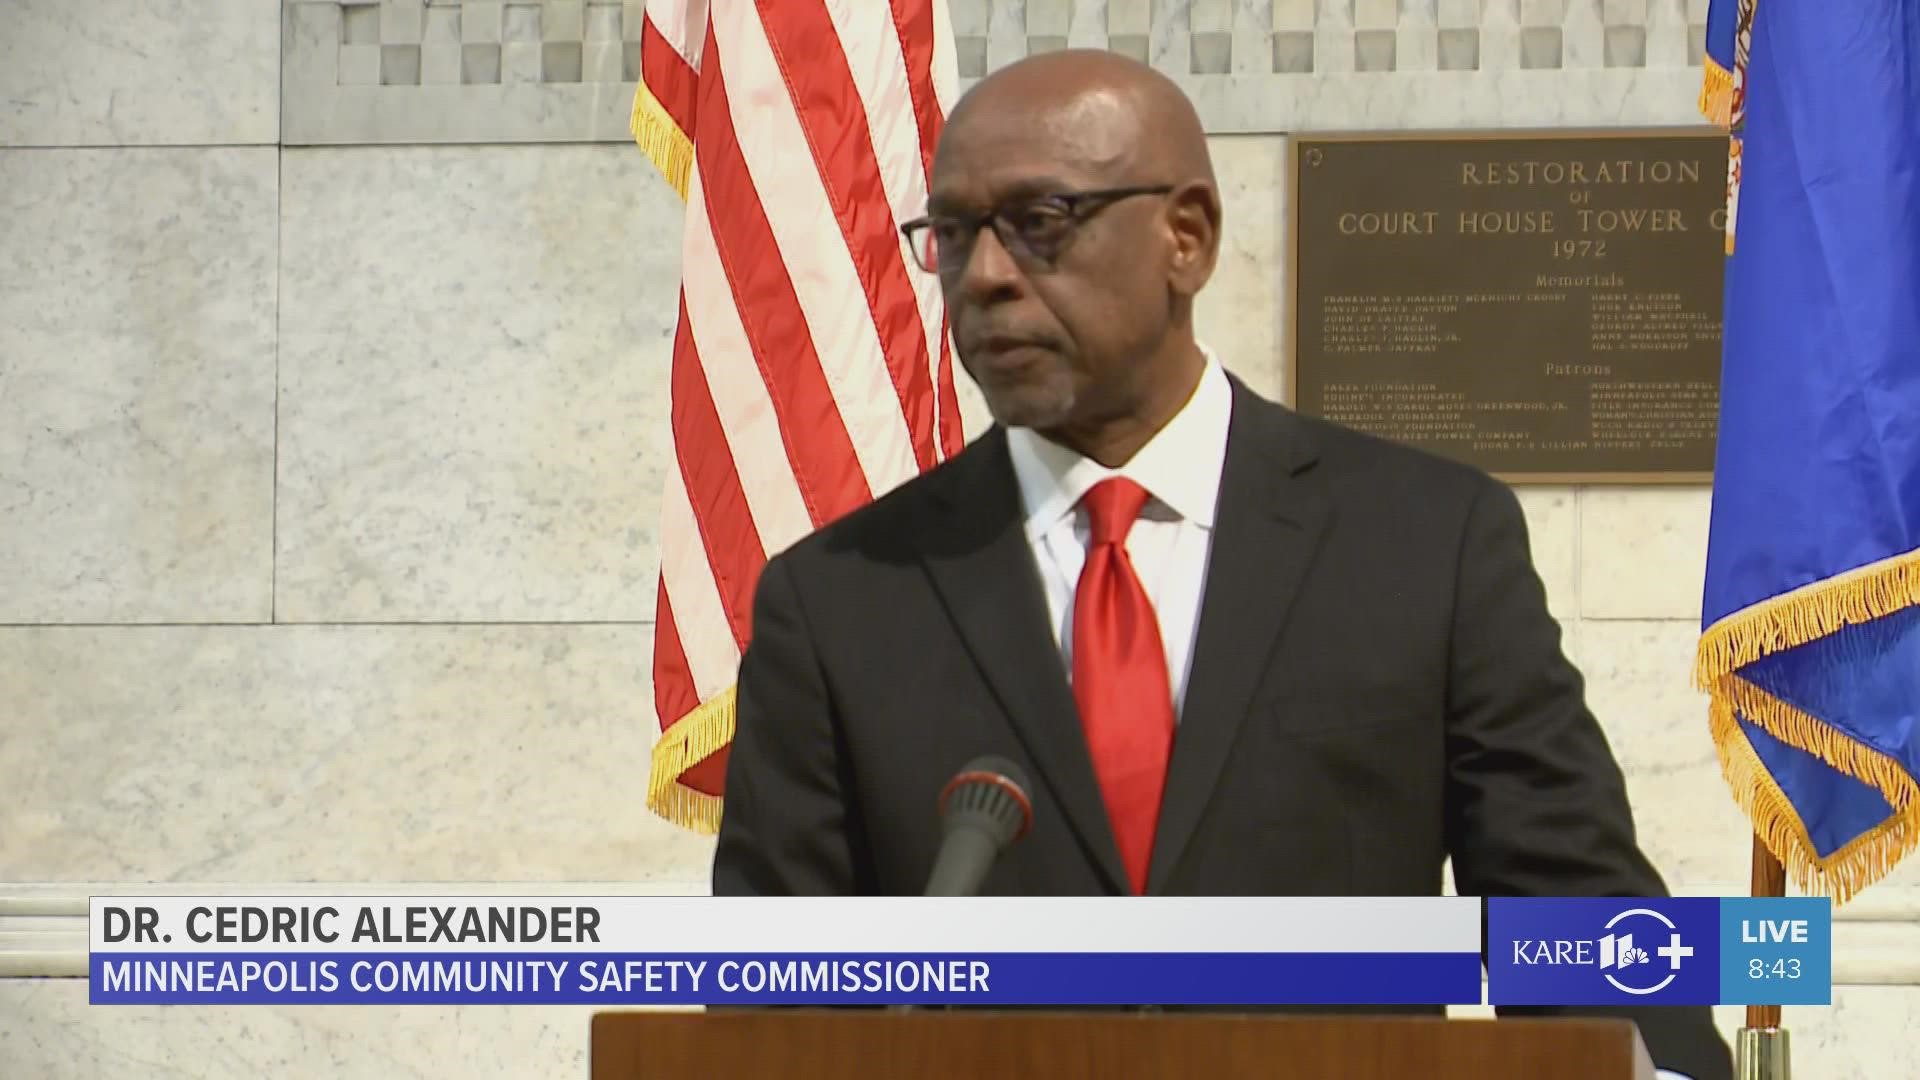 Dr. Cedric Alexander was sworn in as Minneapolis' first Community Safety Commissioner on Monday, Aug. 8.